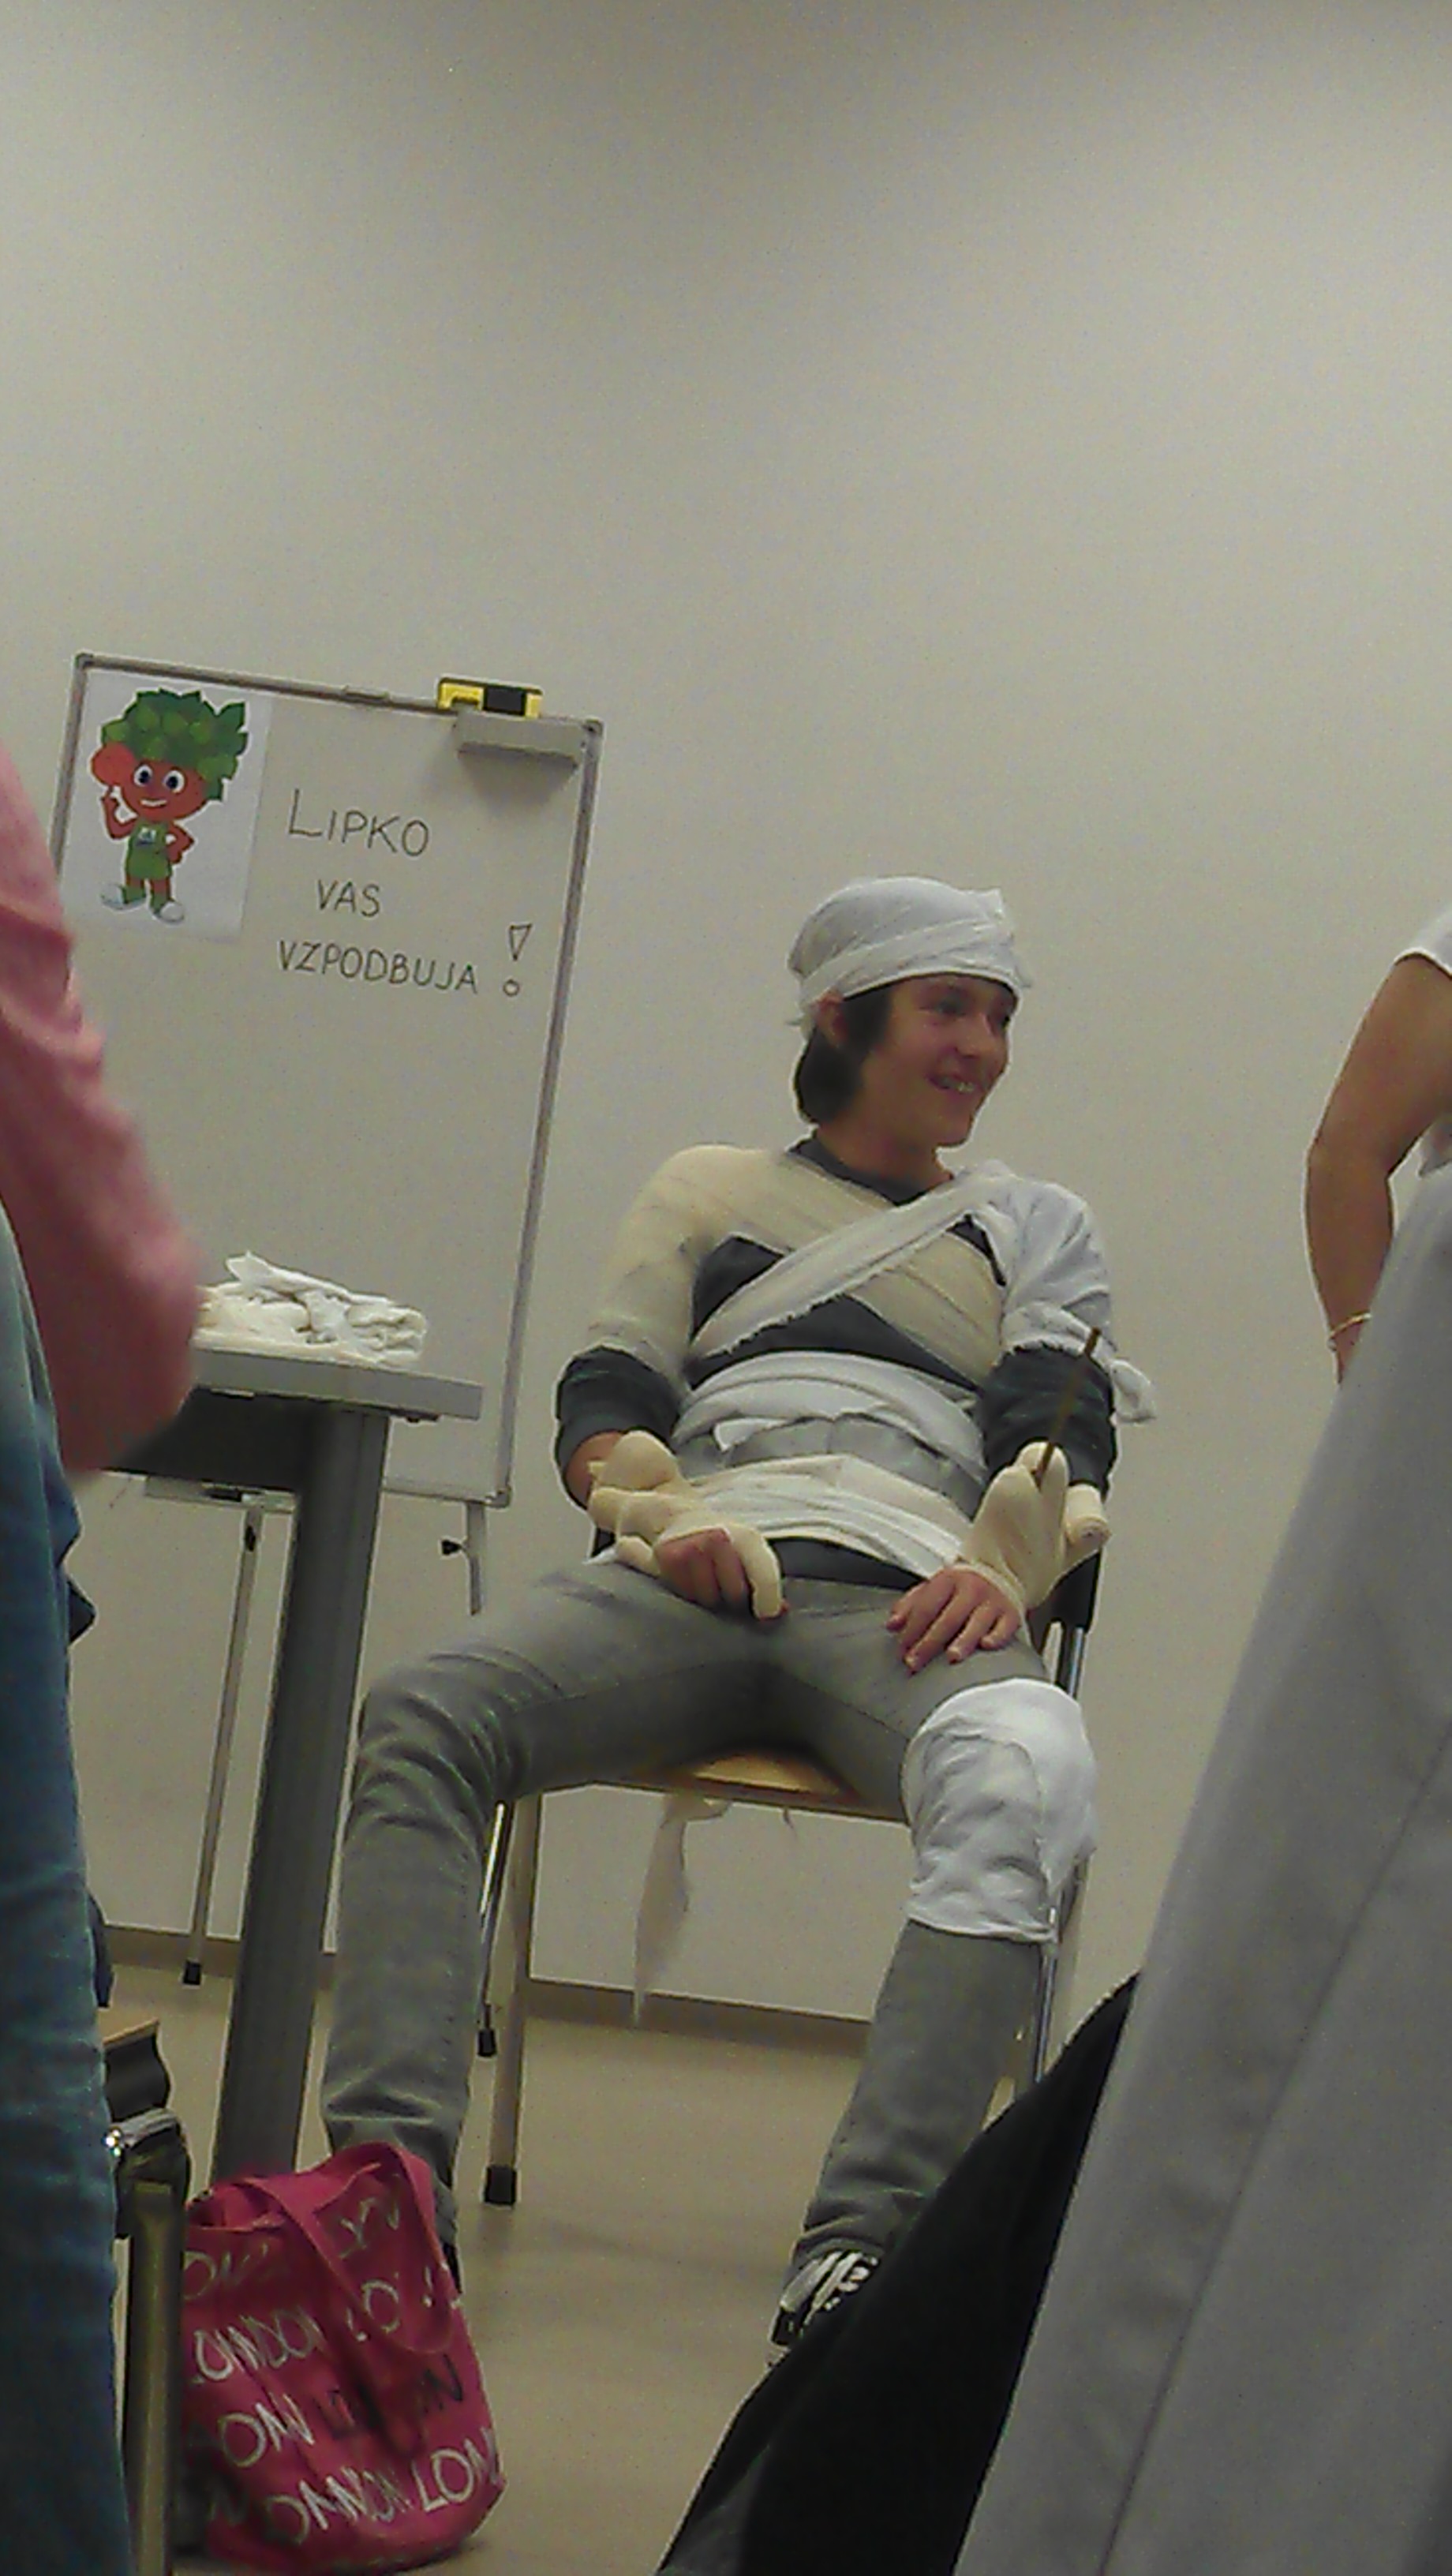 One of my bros got to be the test dummy in First Aid class ;)